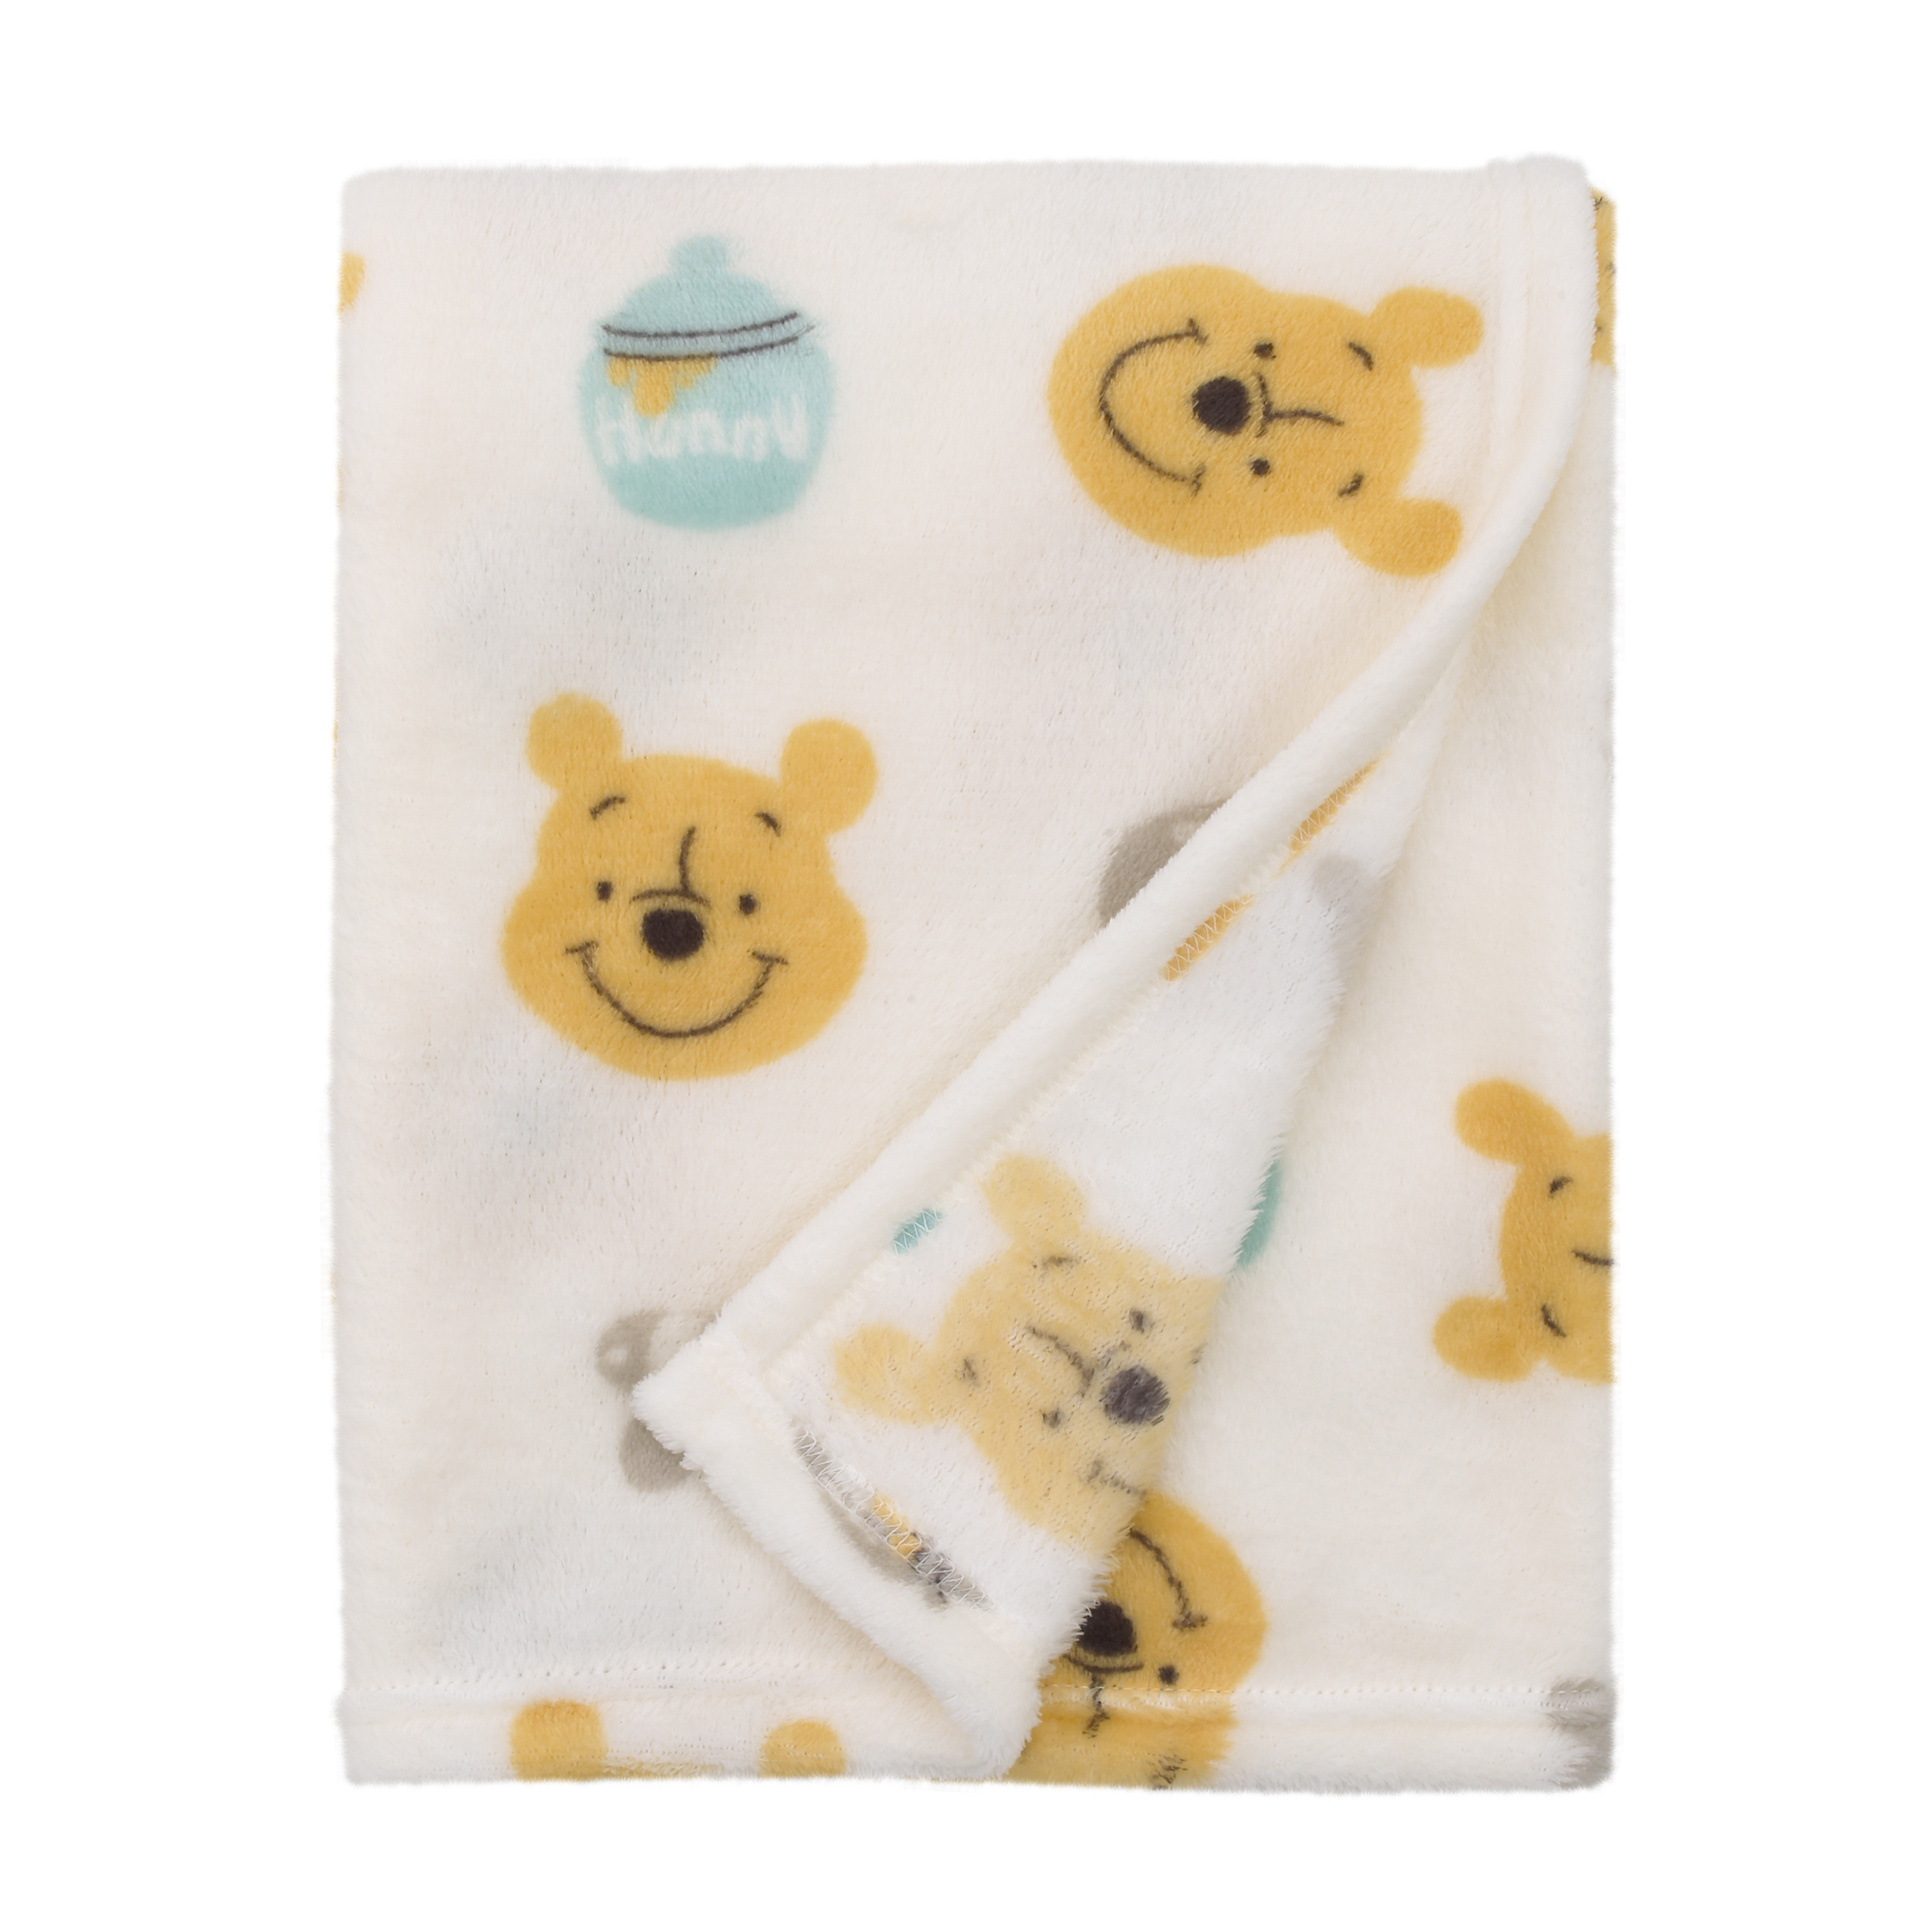 Disney Winnie The Pooh - Ivory, Yellow and Aqua Super Soft Baby Blanket, Allover Print, Infant, Unisex, Plush Polyester - image 1 of 6